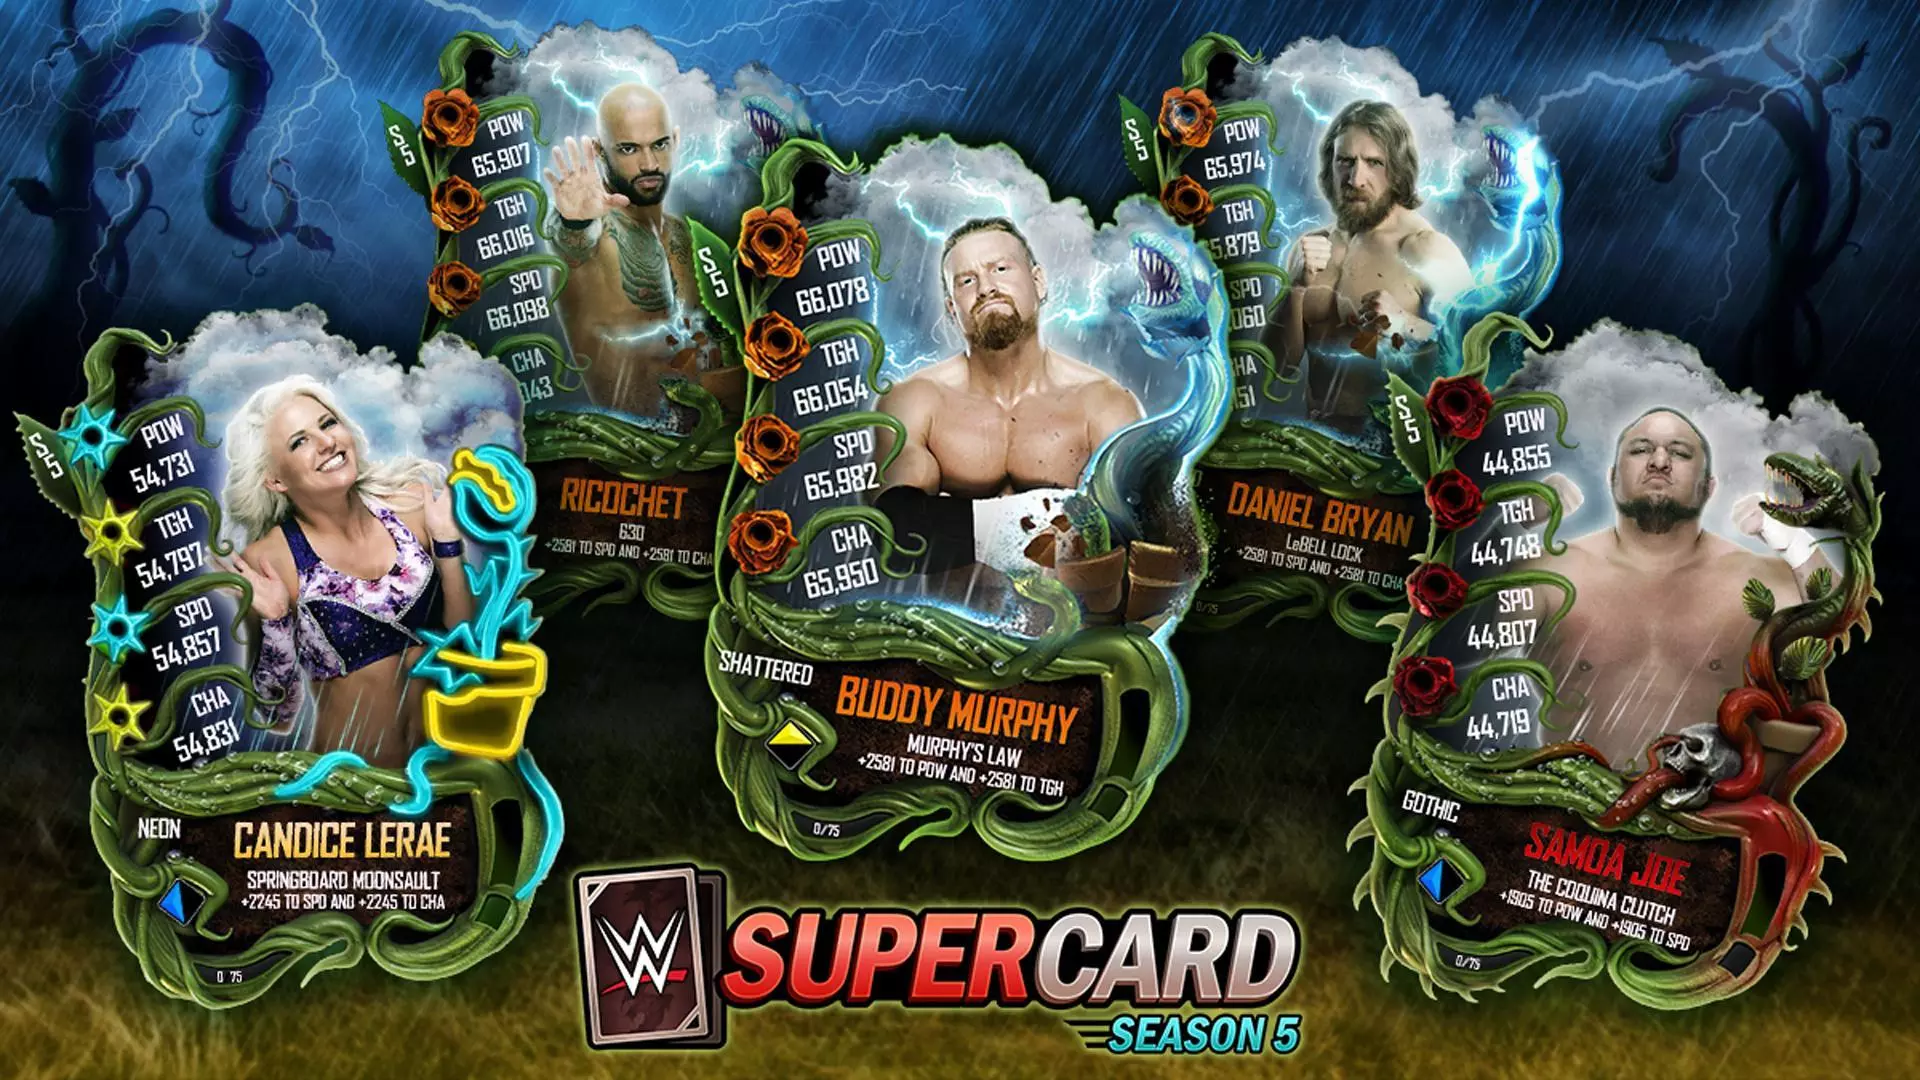 WWE SuperCard Spring 2019 Promotion, featuring 18 New Cards!